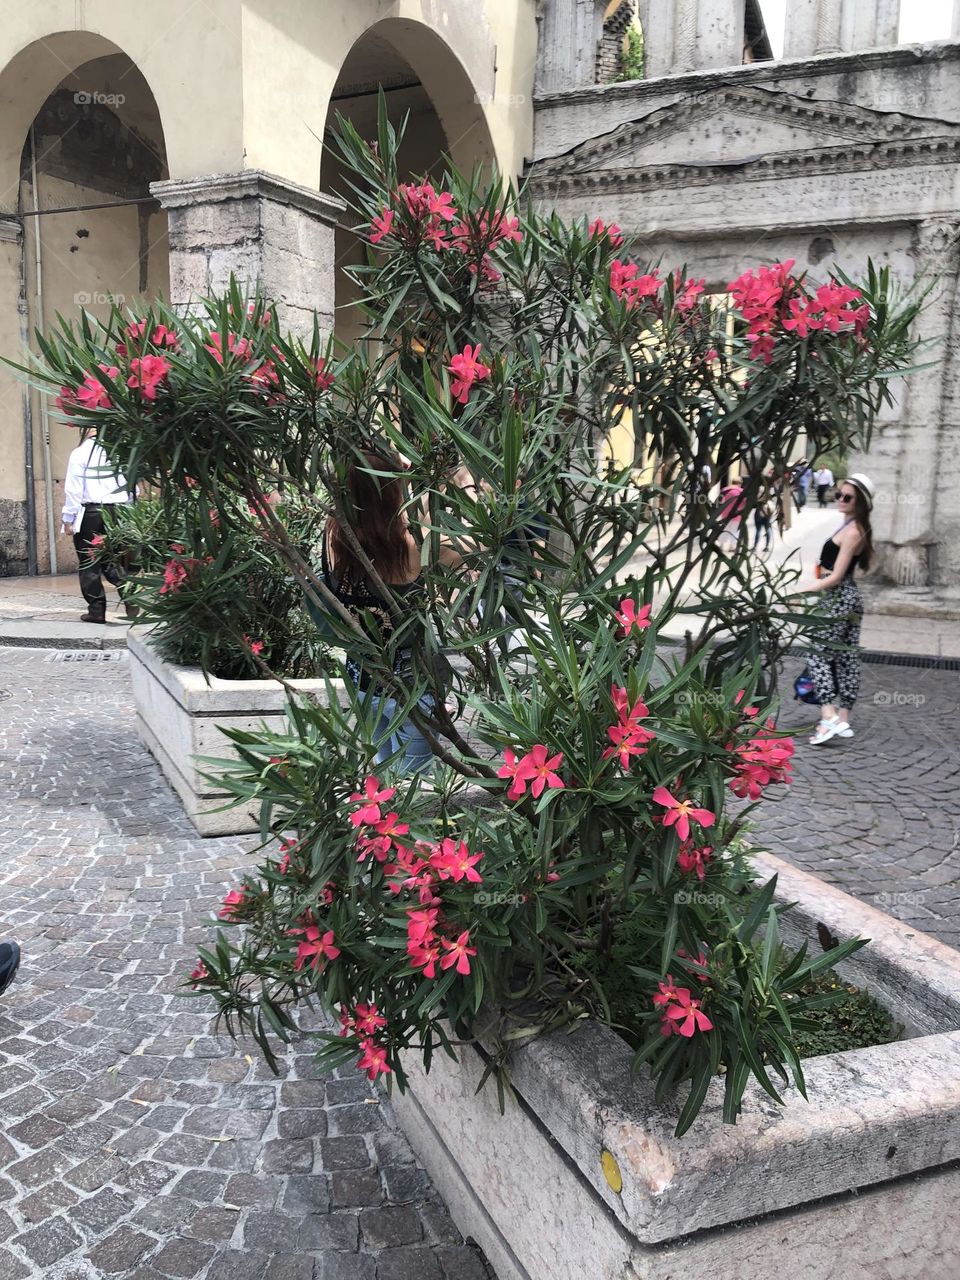 Green bush with pink flowers in the square of Verona Italy